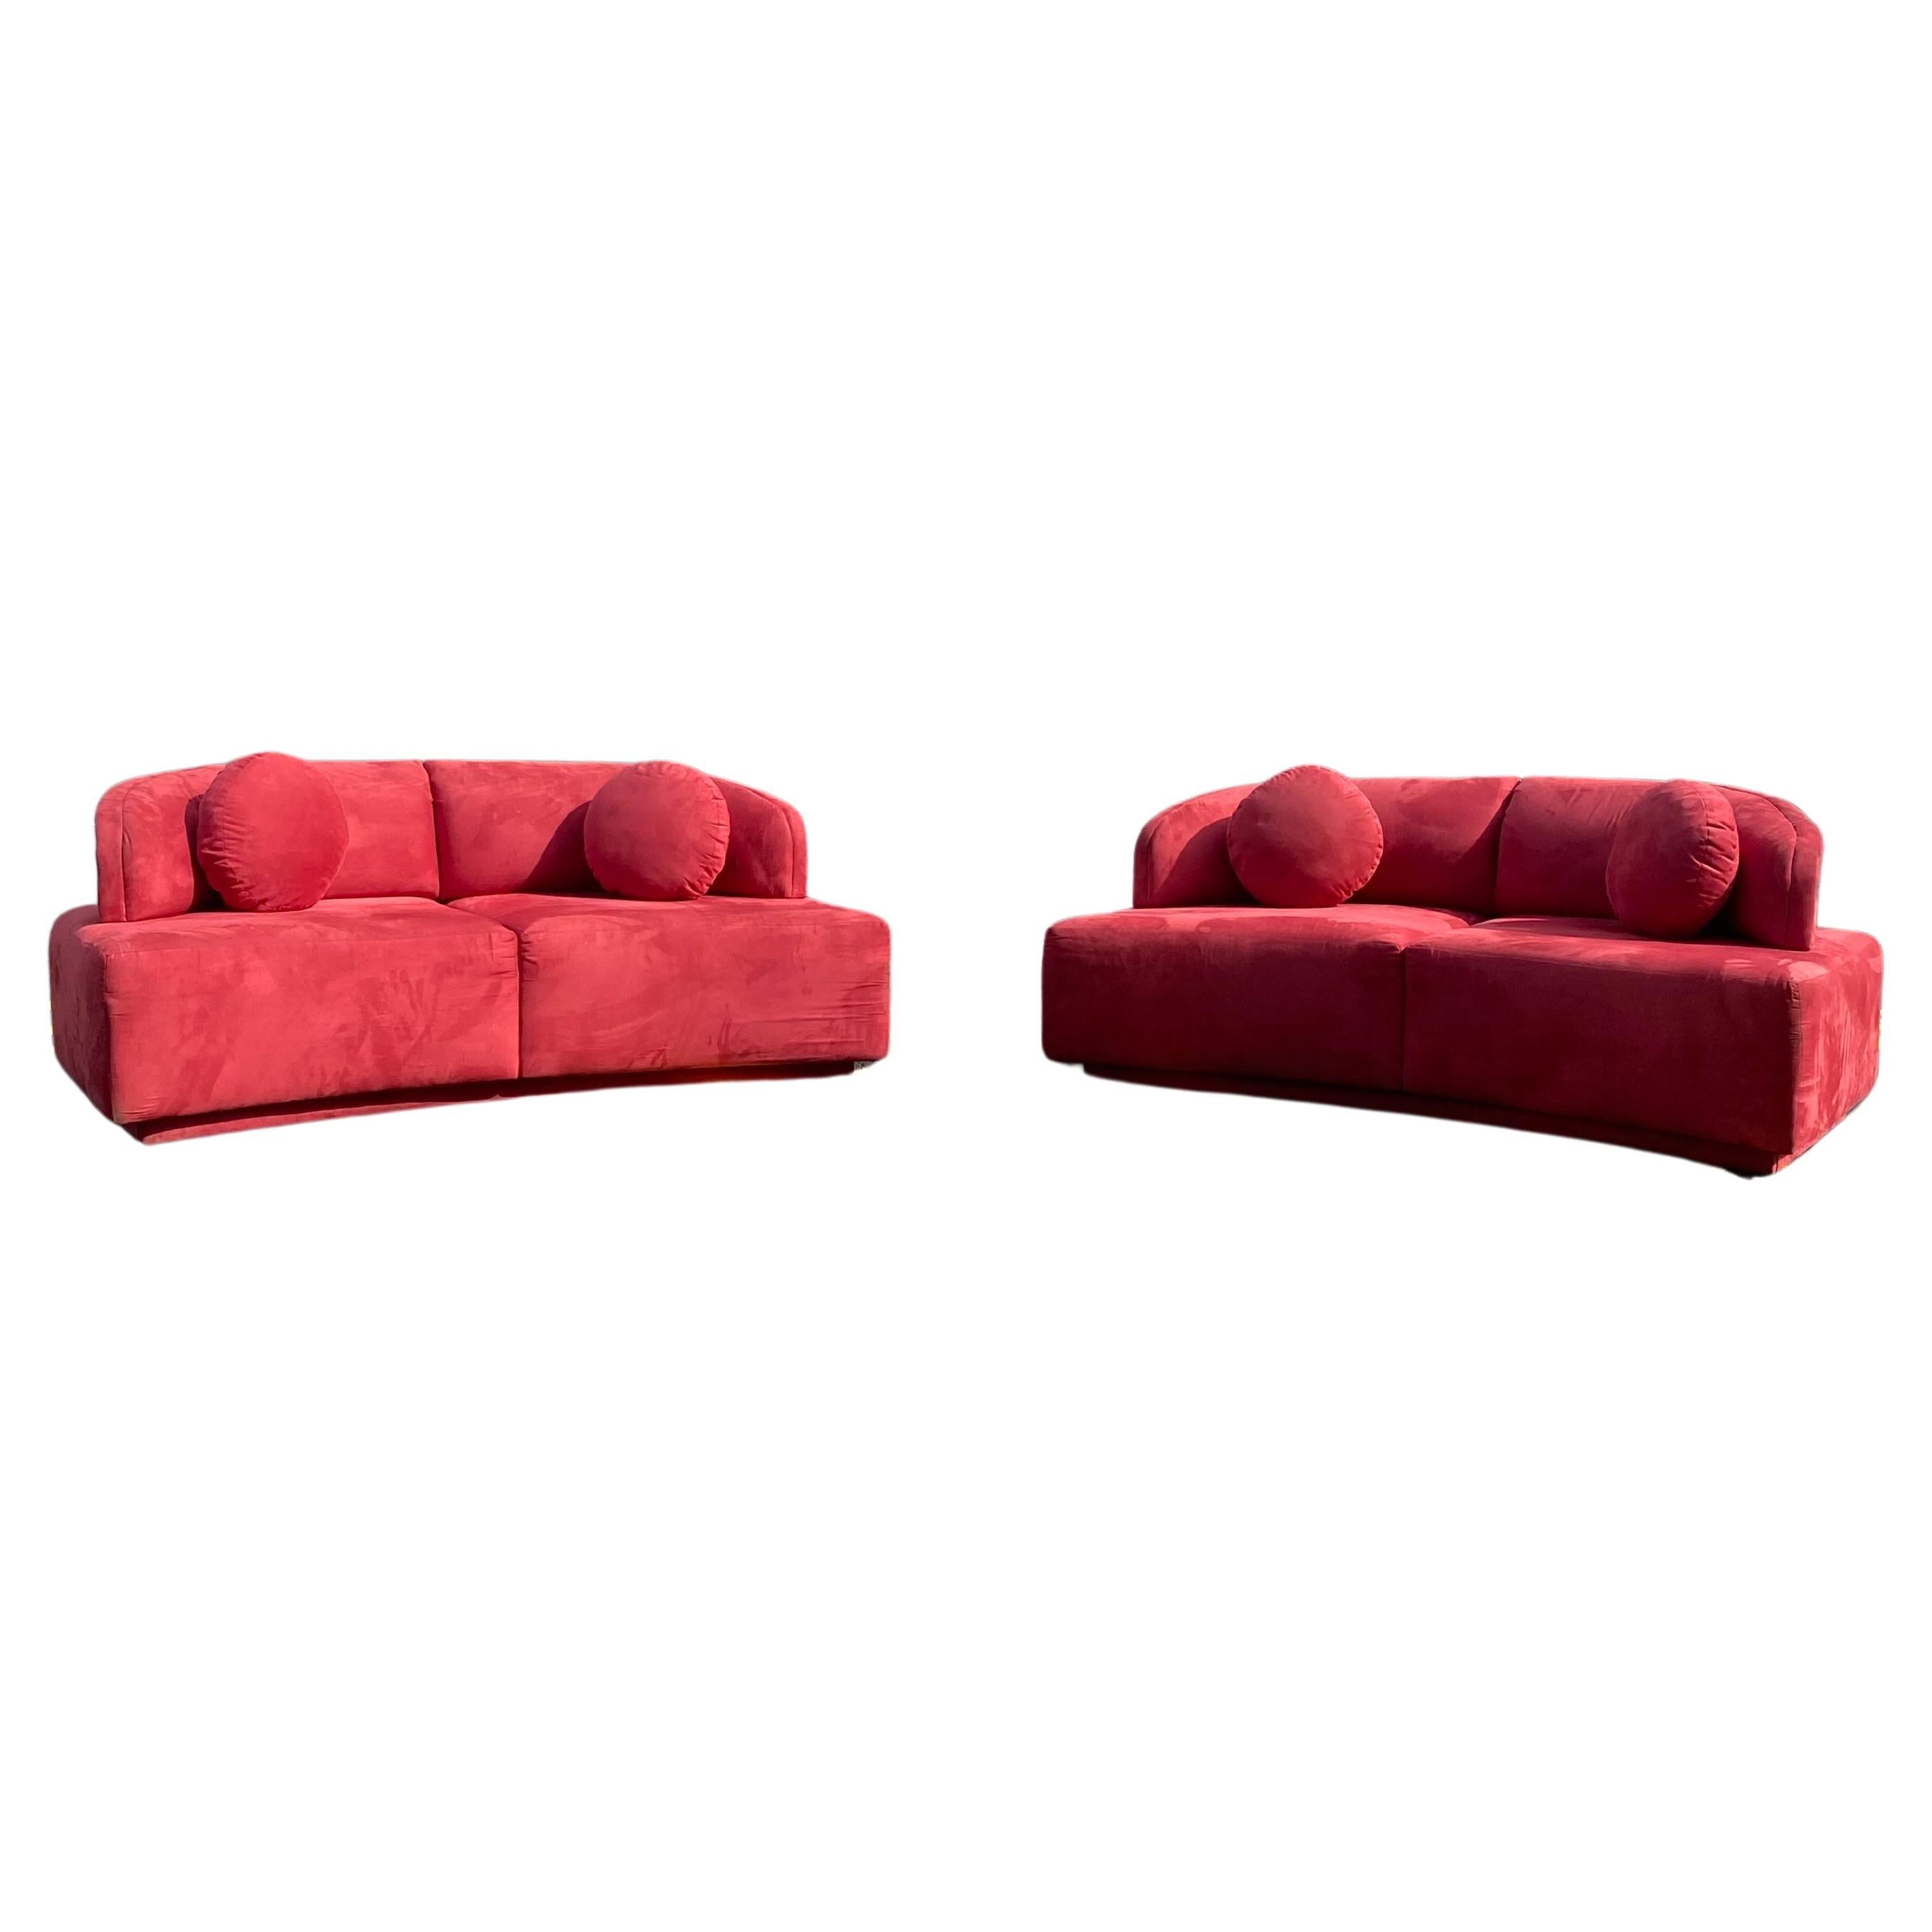 1980s Sculptural Weiman Red Cloud Sofa Loveseat, Set of 2 For Sale